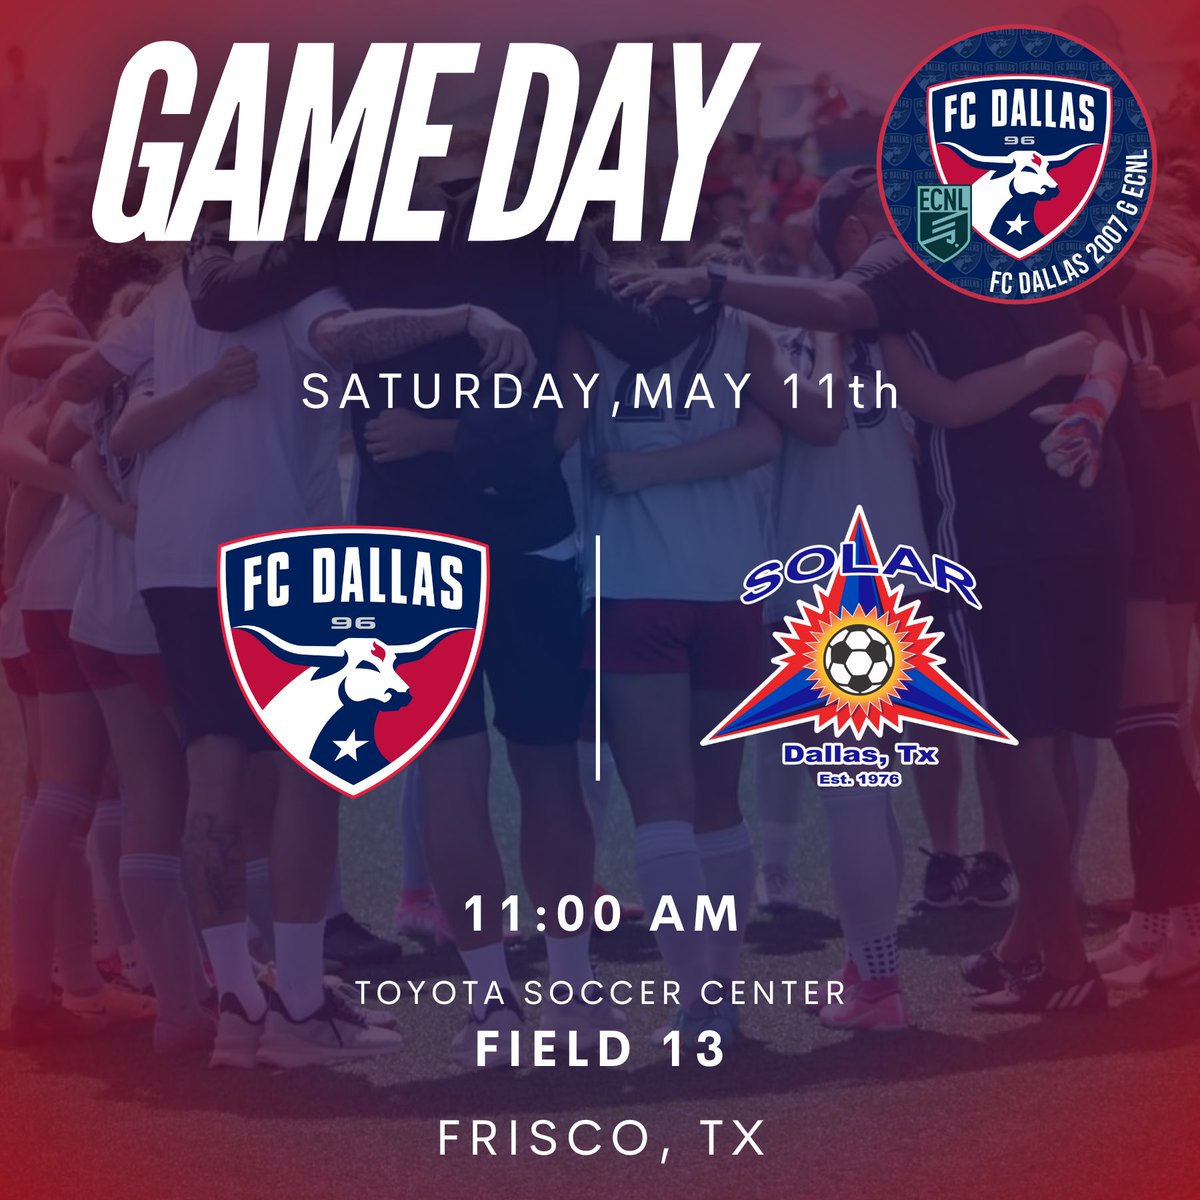 It’s GAME DAY! A big match up 🆚 our cross town rivals. Let’s GO‼️ #DTID | #HeartAndHustle @FCDwomen | @ECNLgirls